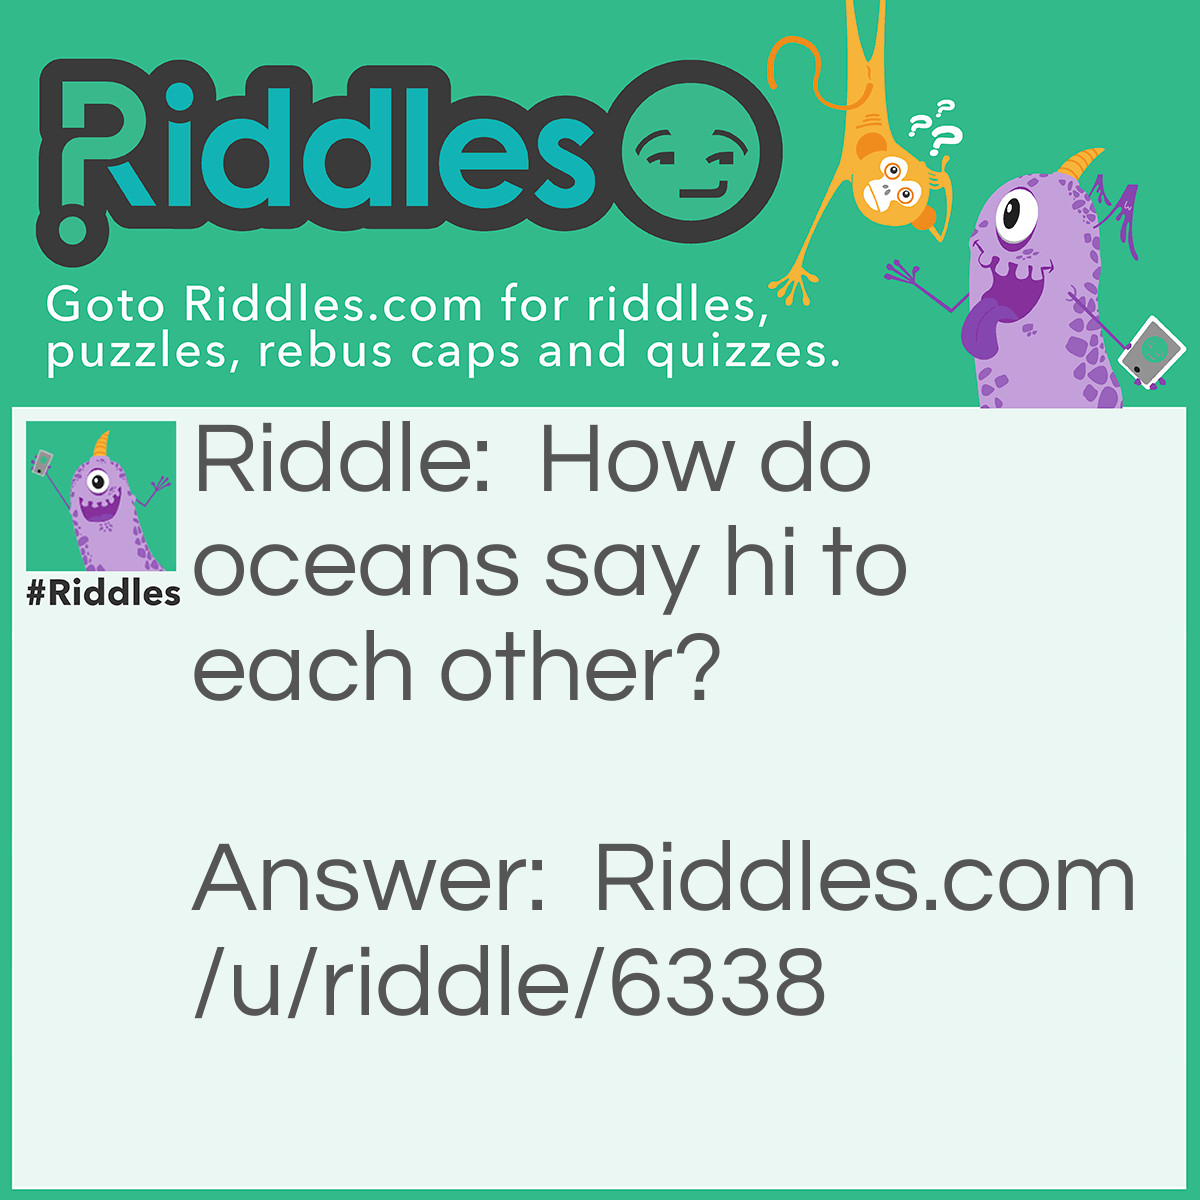 Riddle: How do oceans say hi to each other? Answer: They wave.